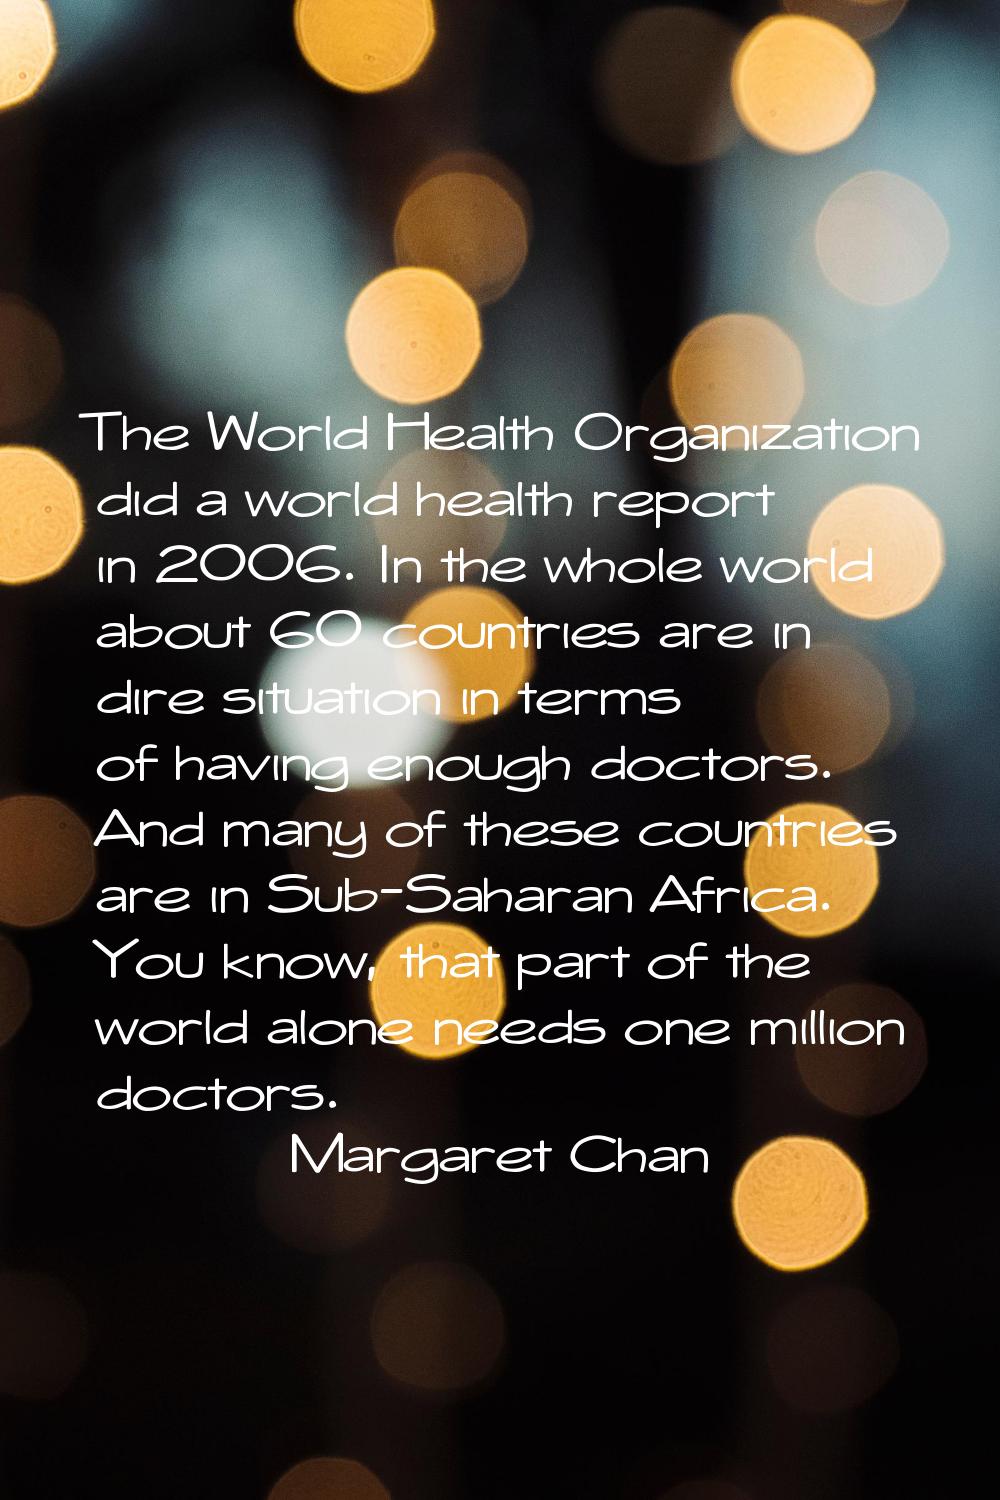 The World Health Organization did a world health report in 2006. In the whole world about 60 countr